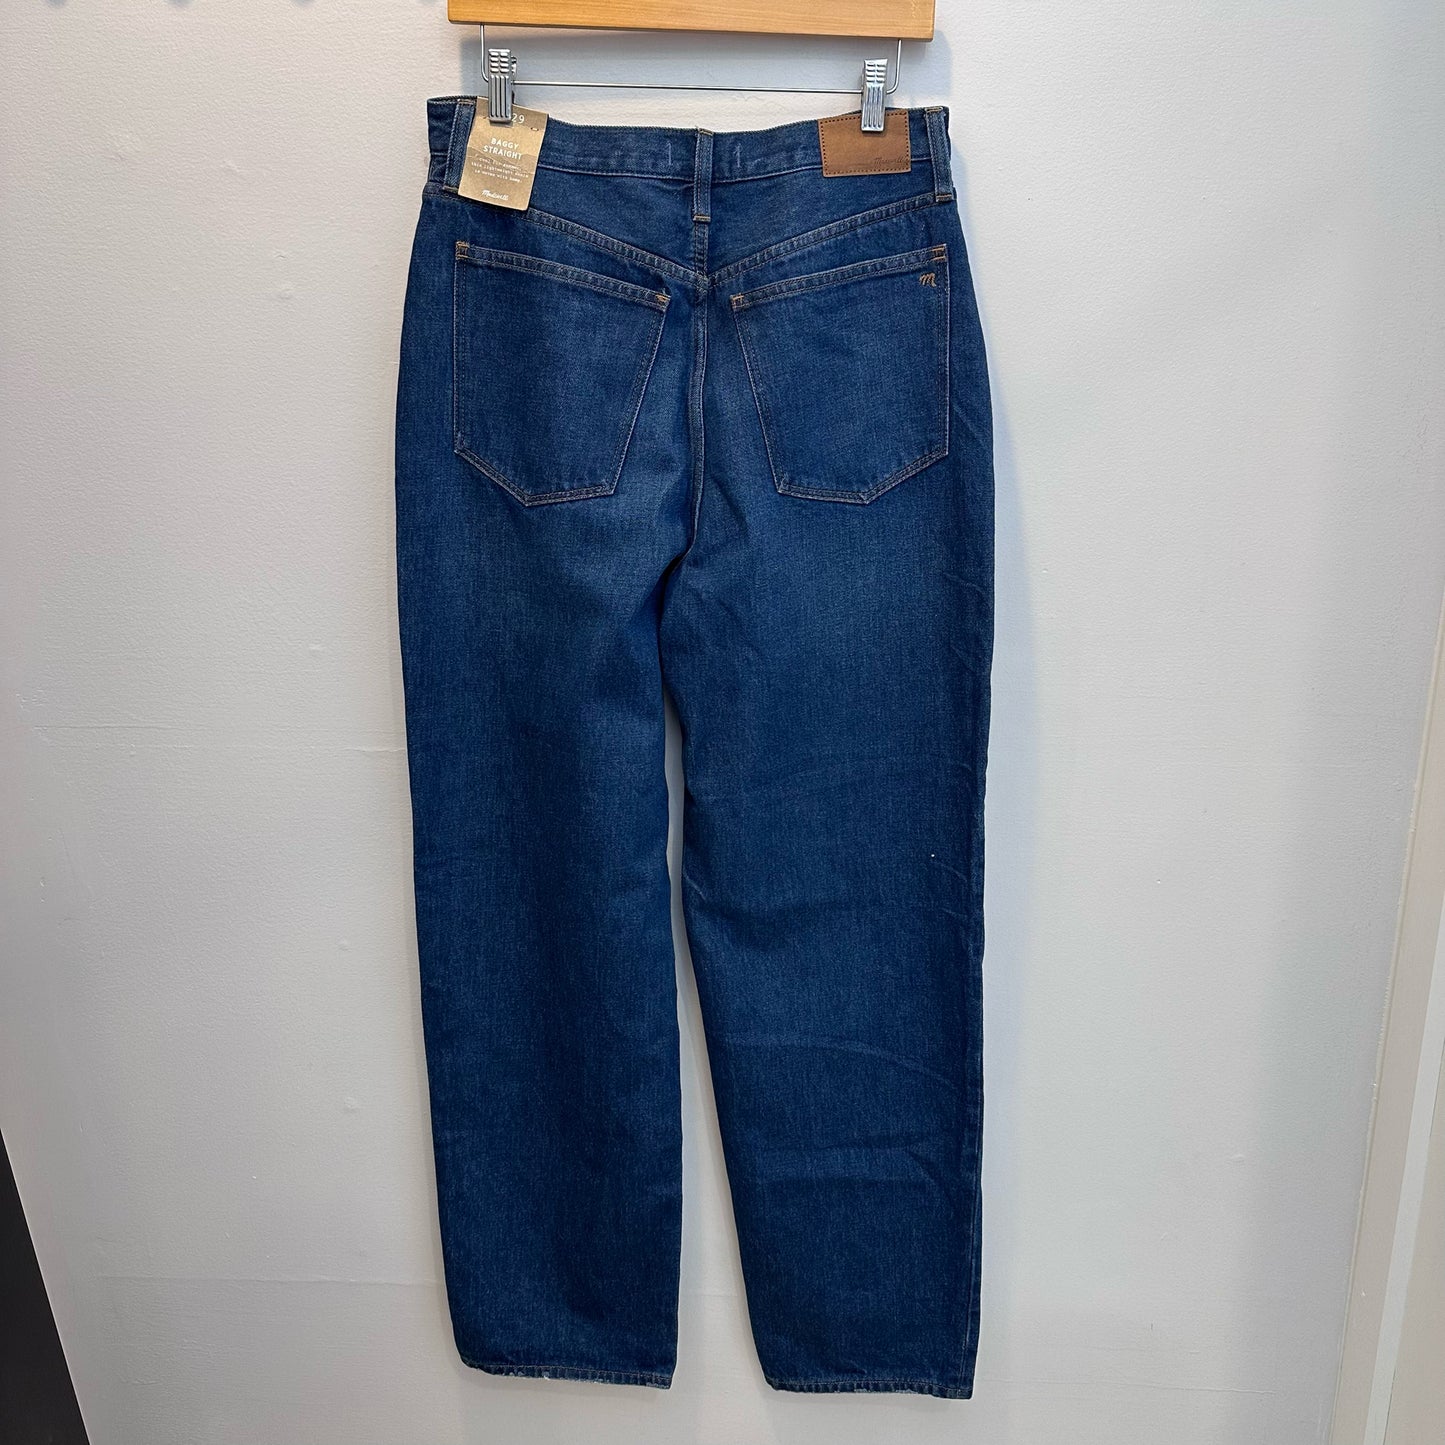 Madewell Size 29 Jeans